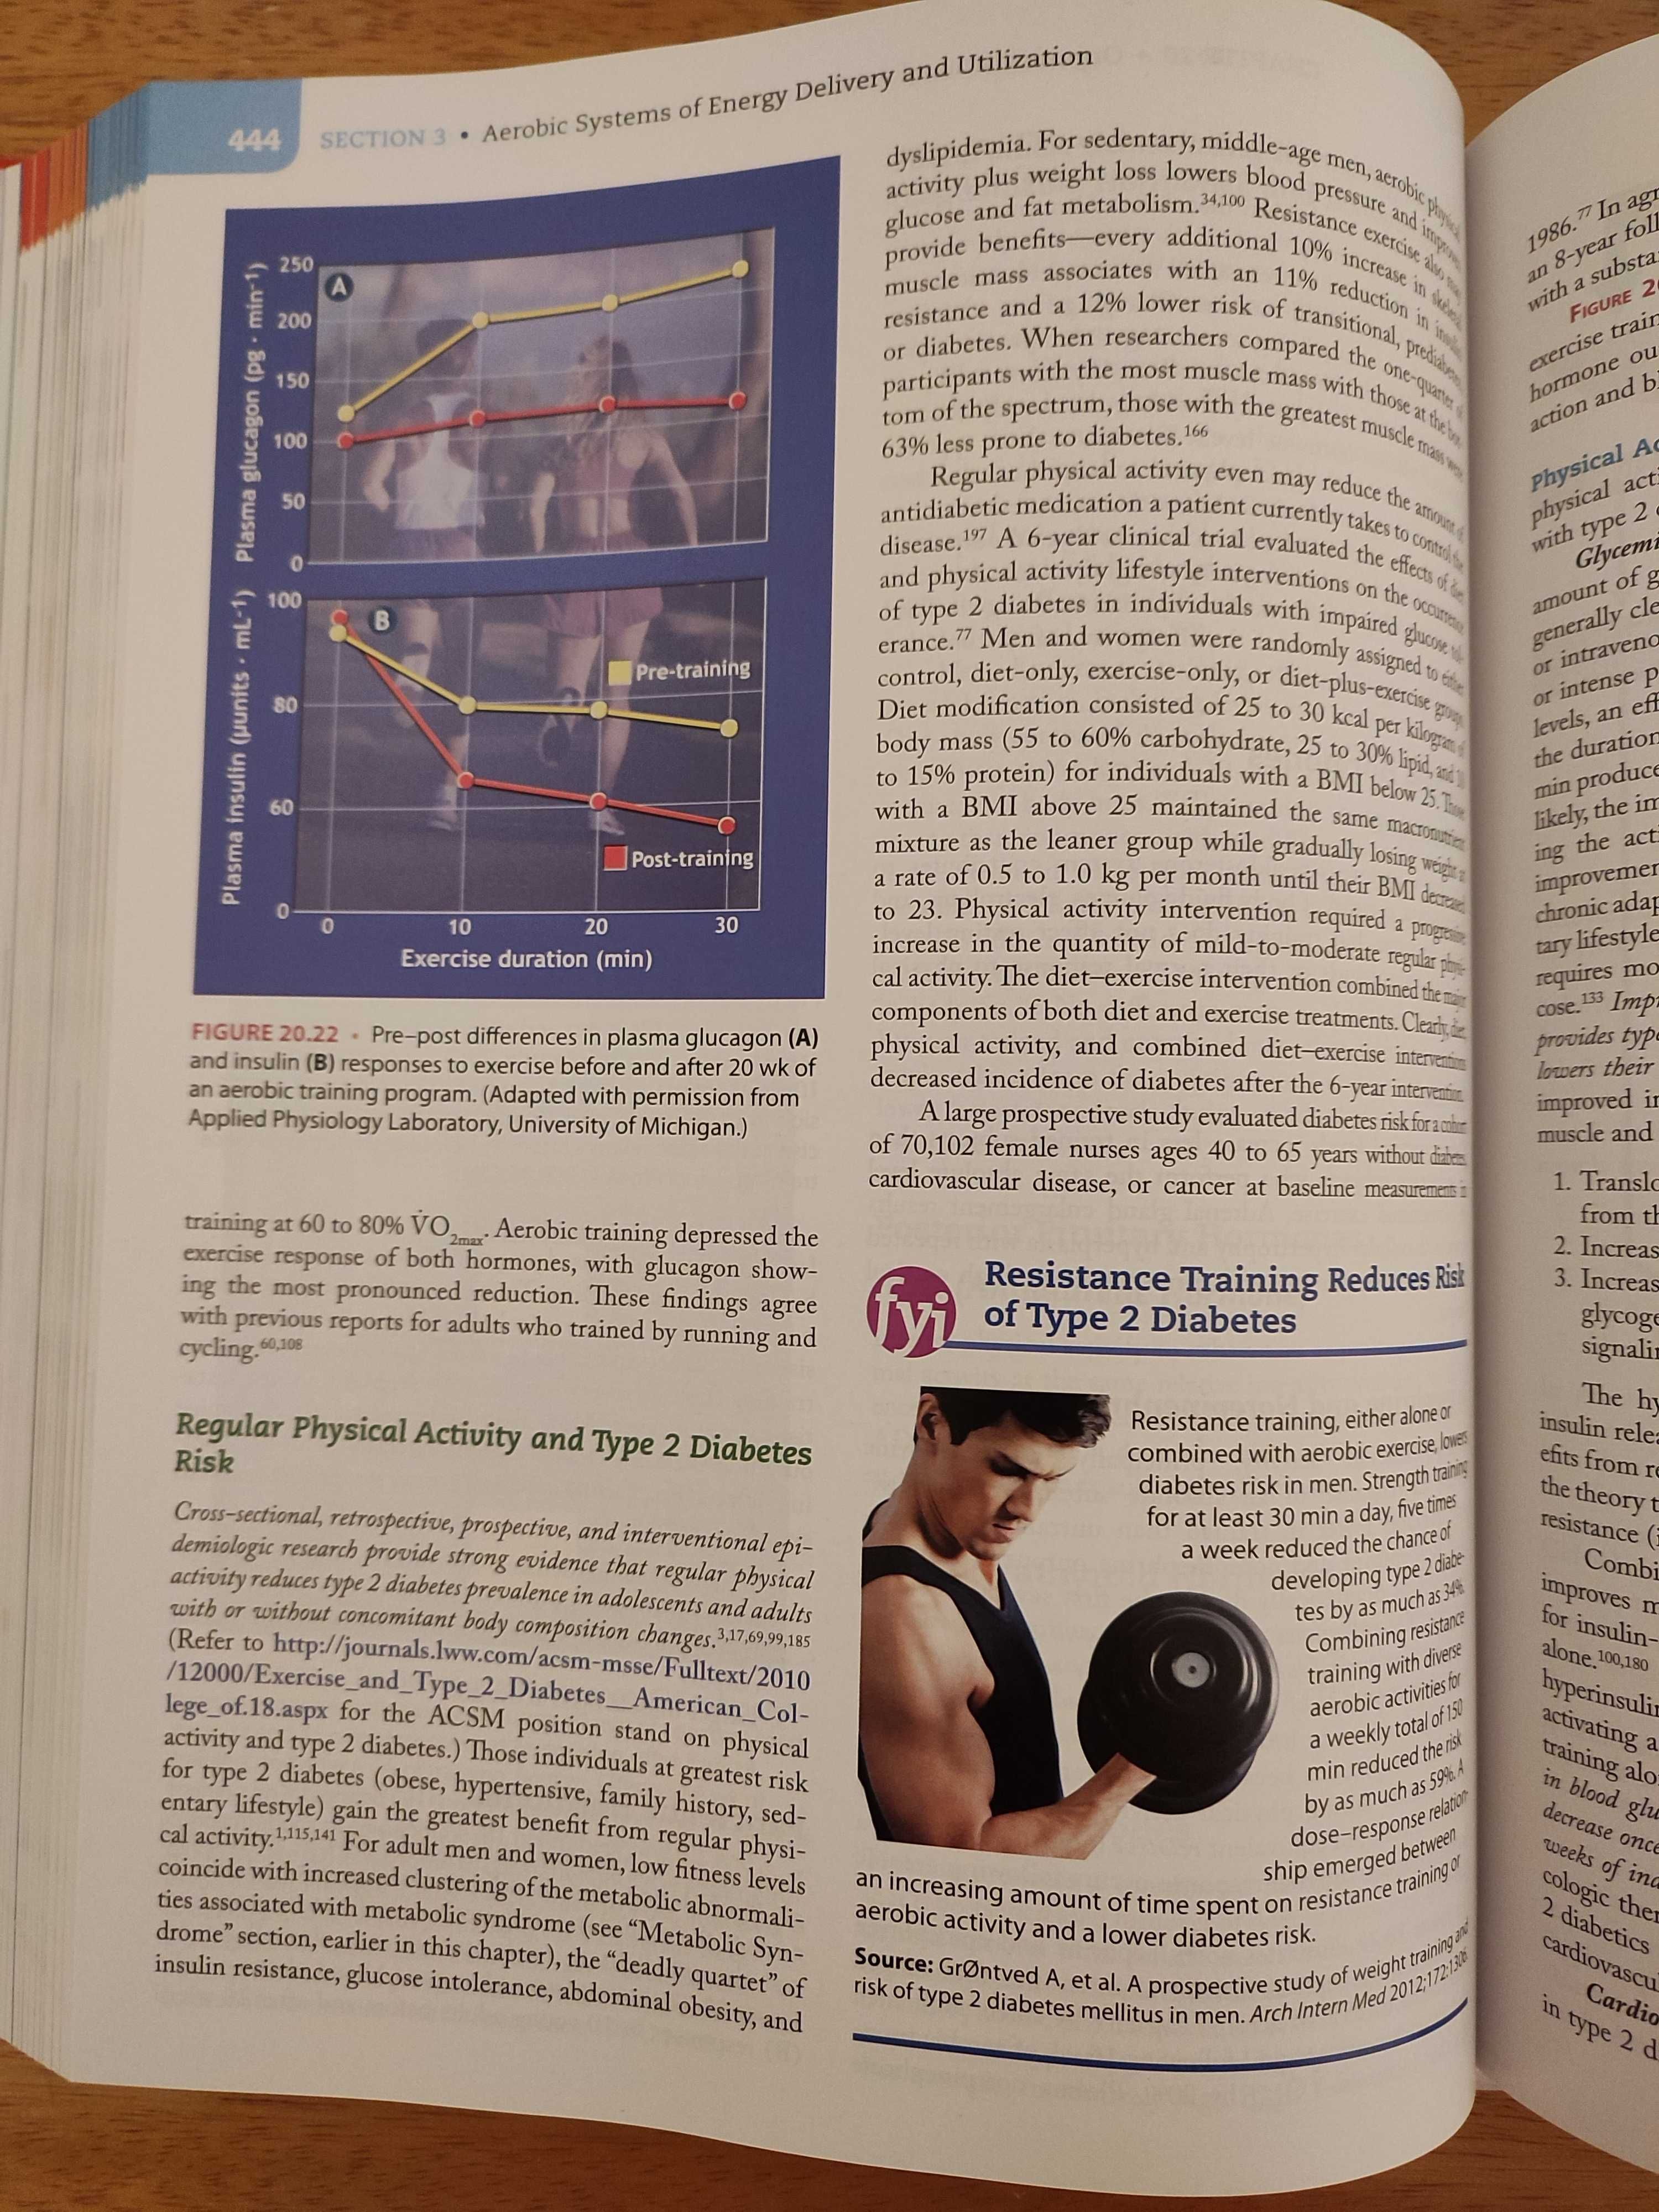 Livro - Exercise Physiology - Nutrition, Energy and Human Performance